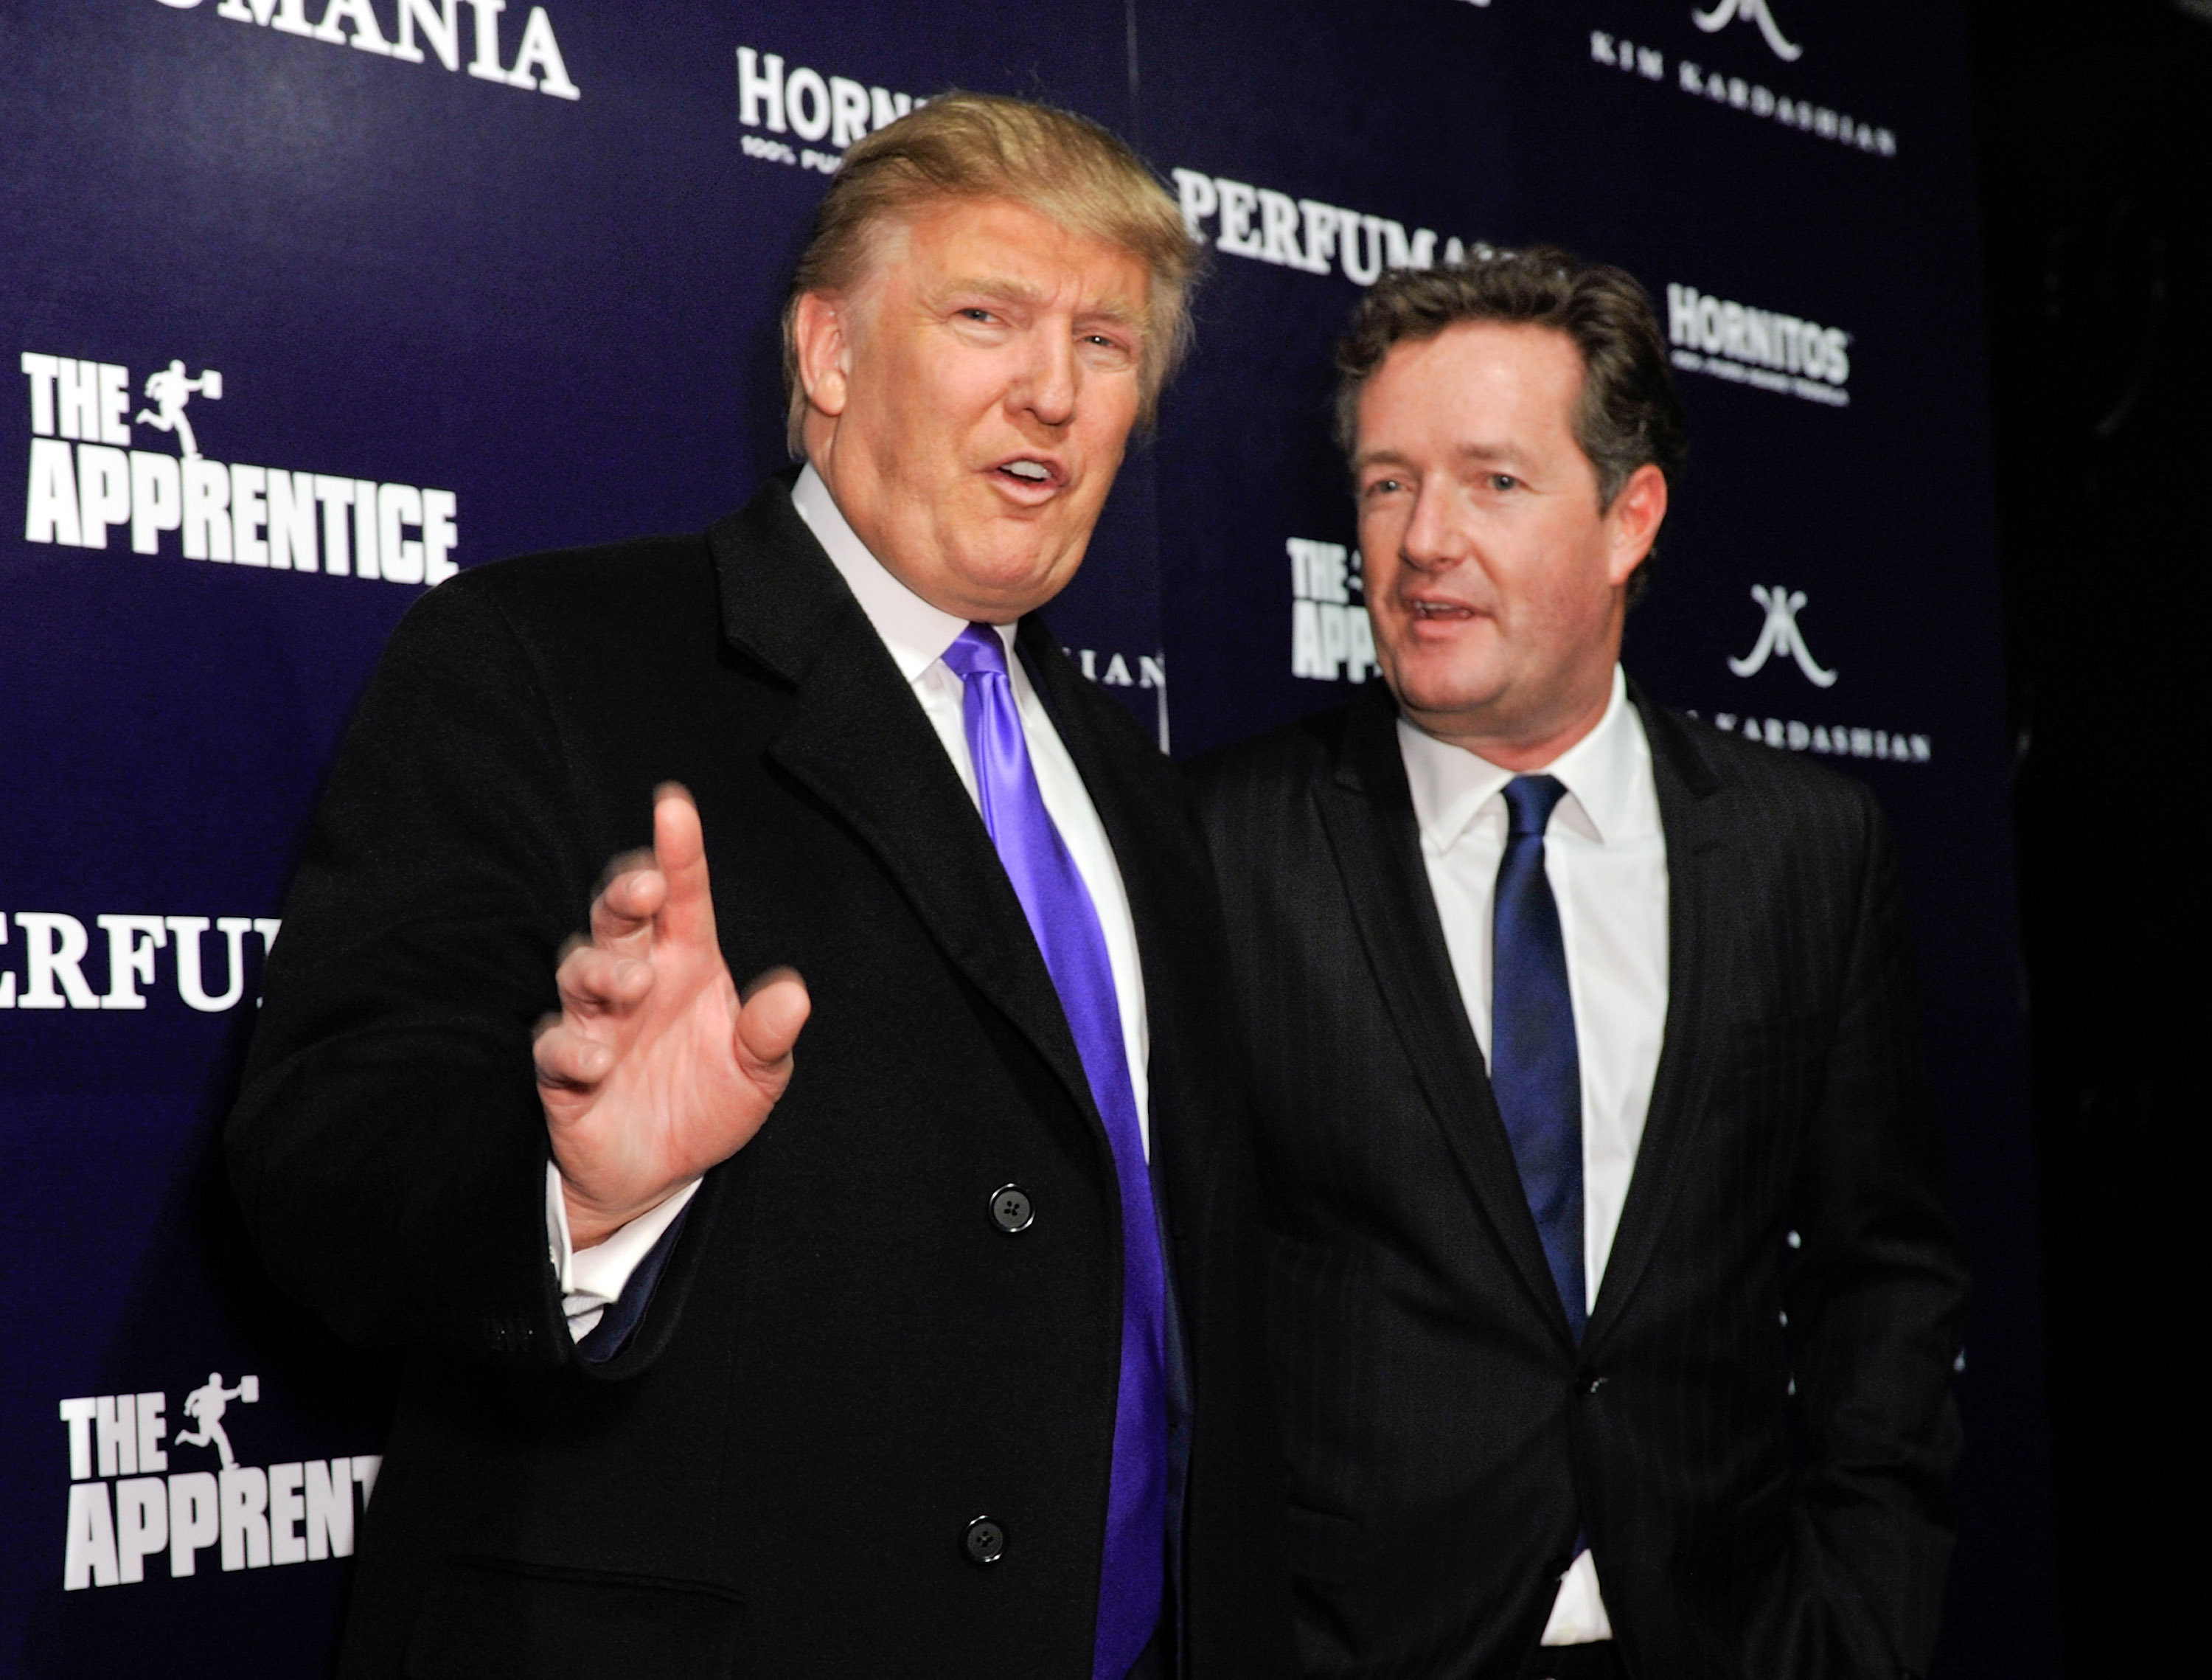 <strong>The President celebrating Perfumania's appearance with Kim Kardashian on 'The Apprentice' in 2010, alongside Piers Morgan</strong>